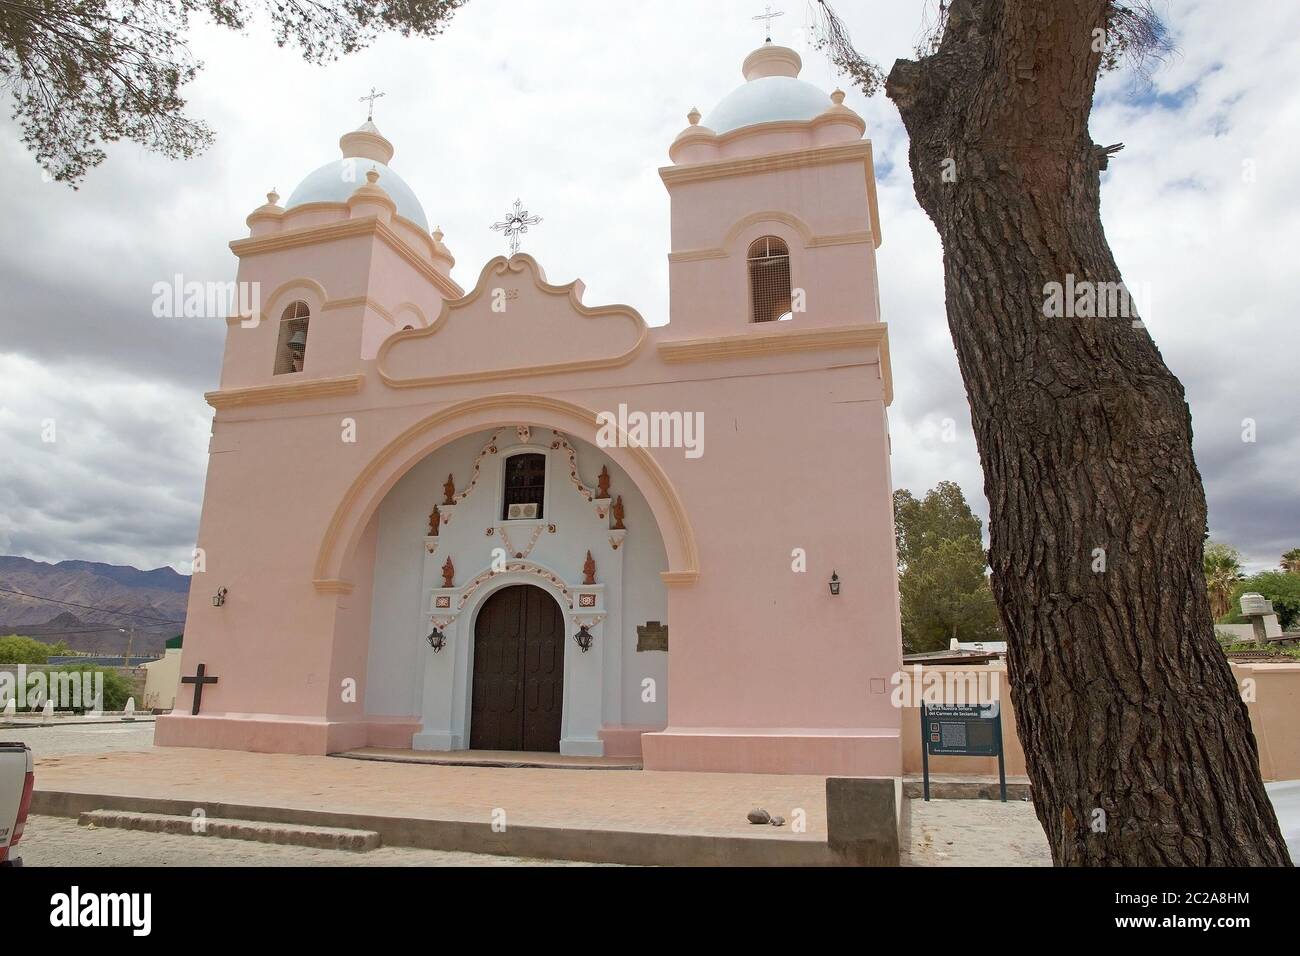 Church at Seclantas village in Calchaqui Valley, Argentina. It is a small village in north west Argentina, 150 km south west from Salta city. Stock Photo